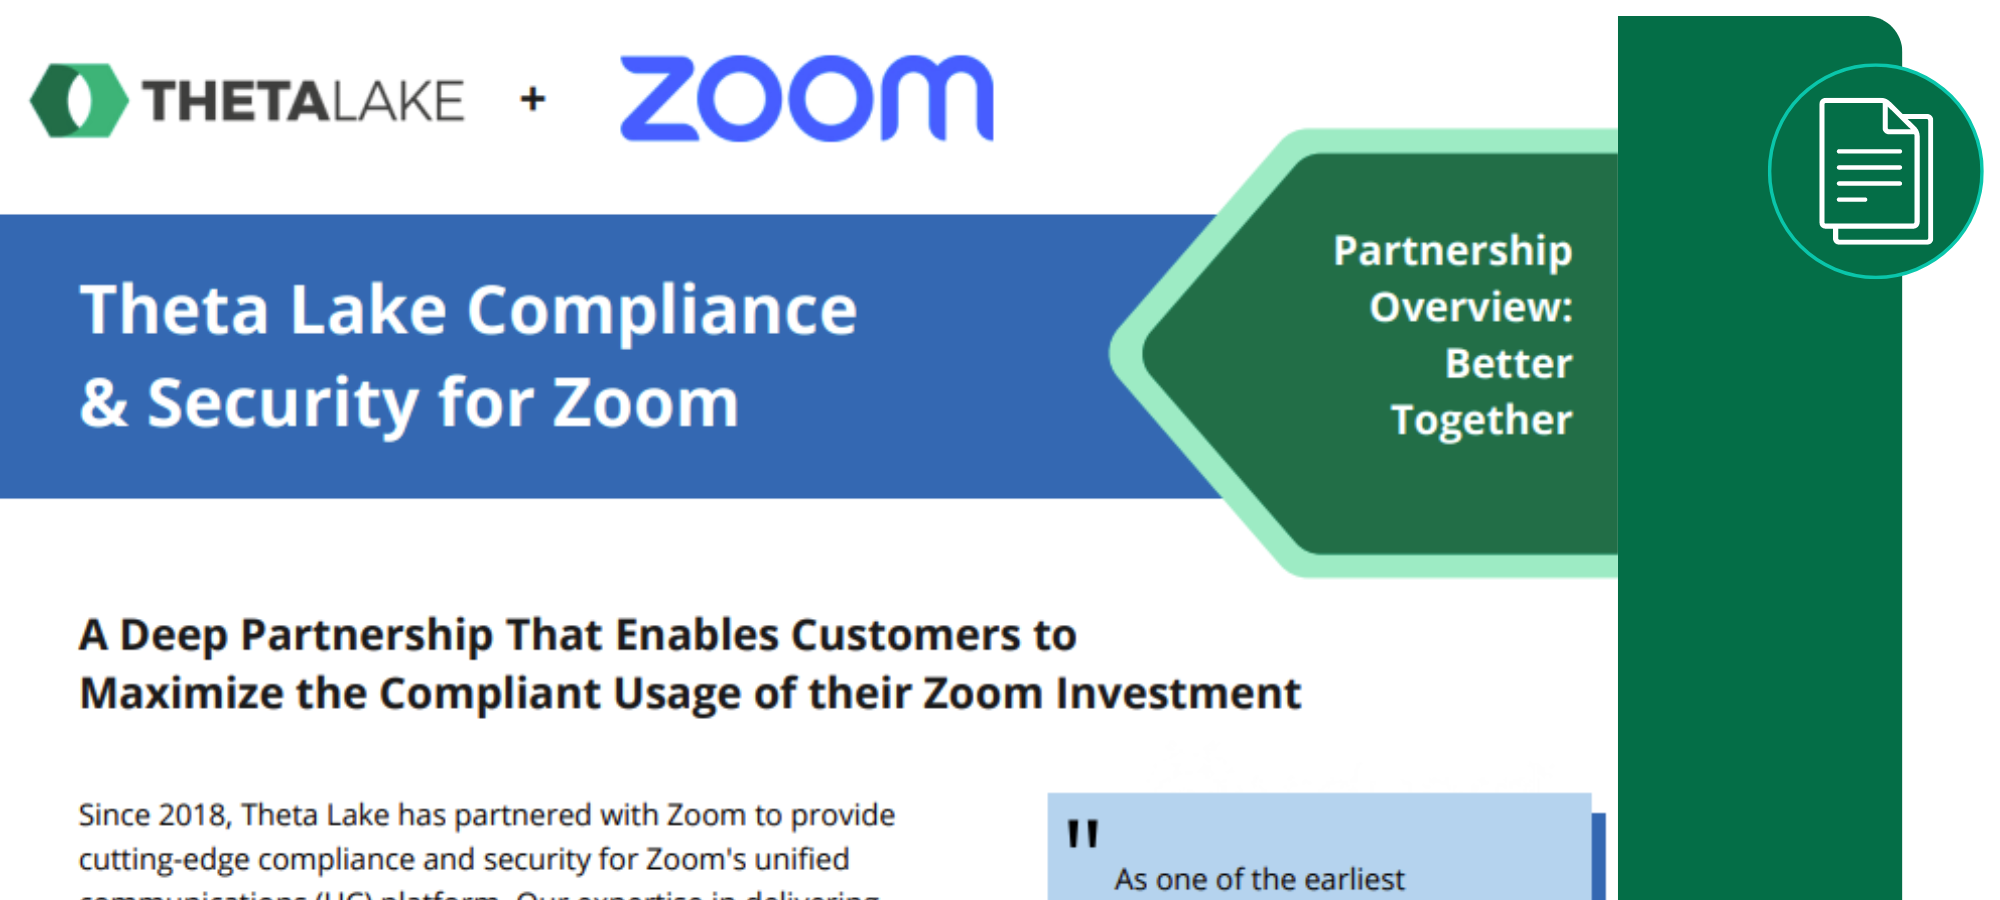 PartnershipOverview ThetaLake and Zoom